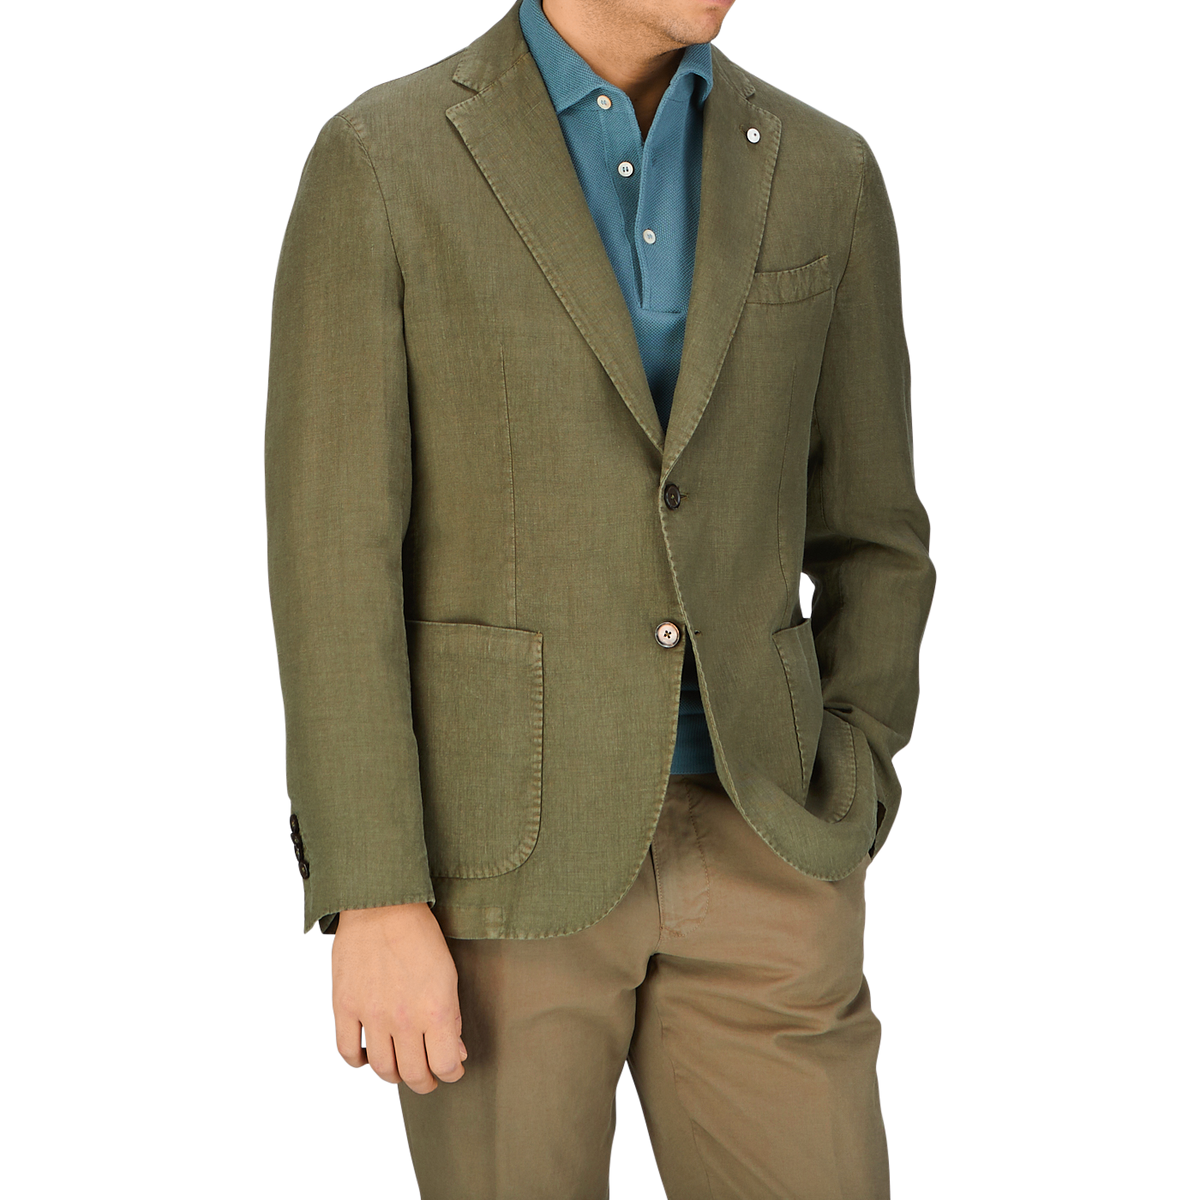 Man wearing a Grass Green Washed Linen Blazer from L.B.M. 1911, blue shirt, and beige pants from Italy.